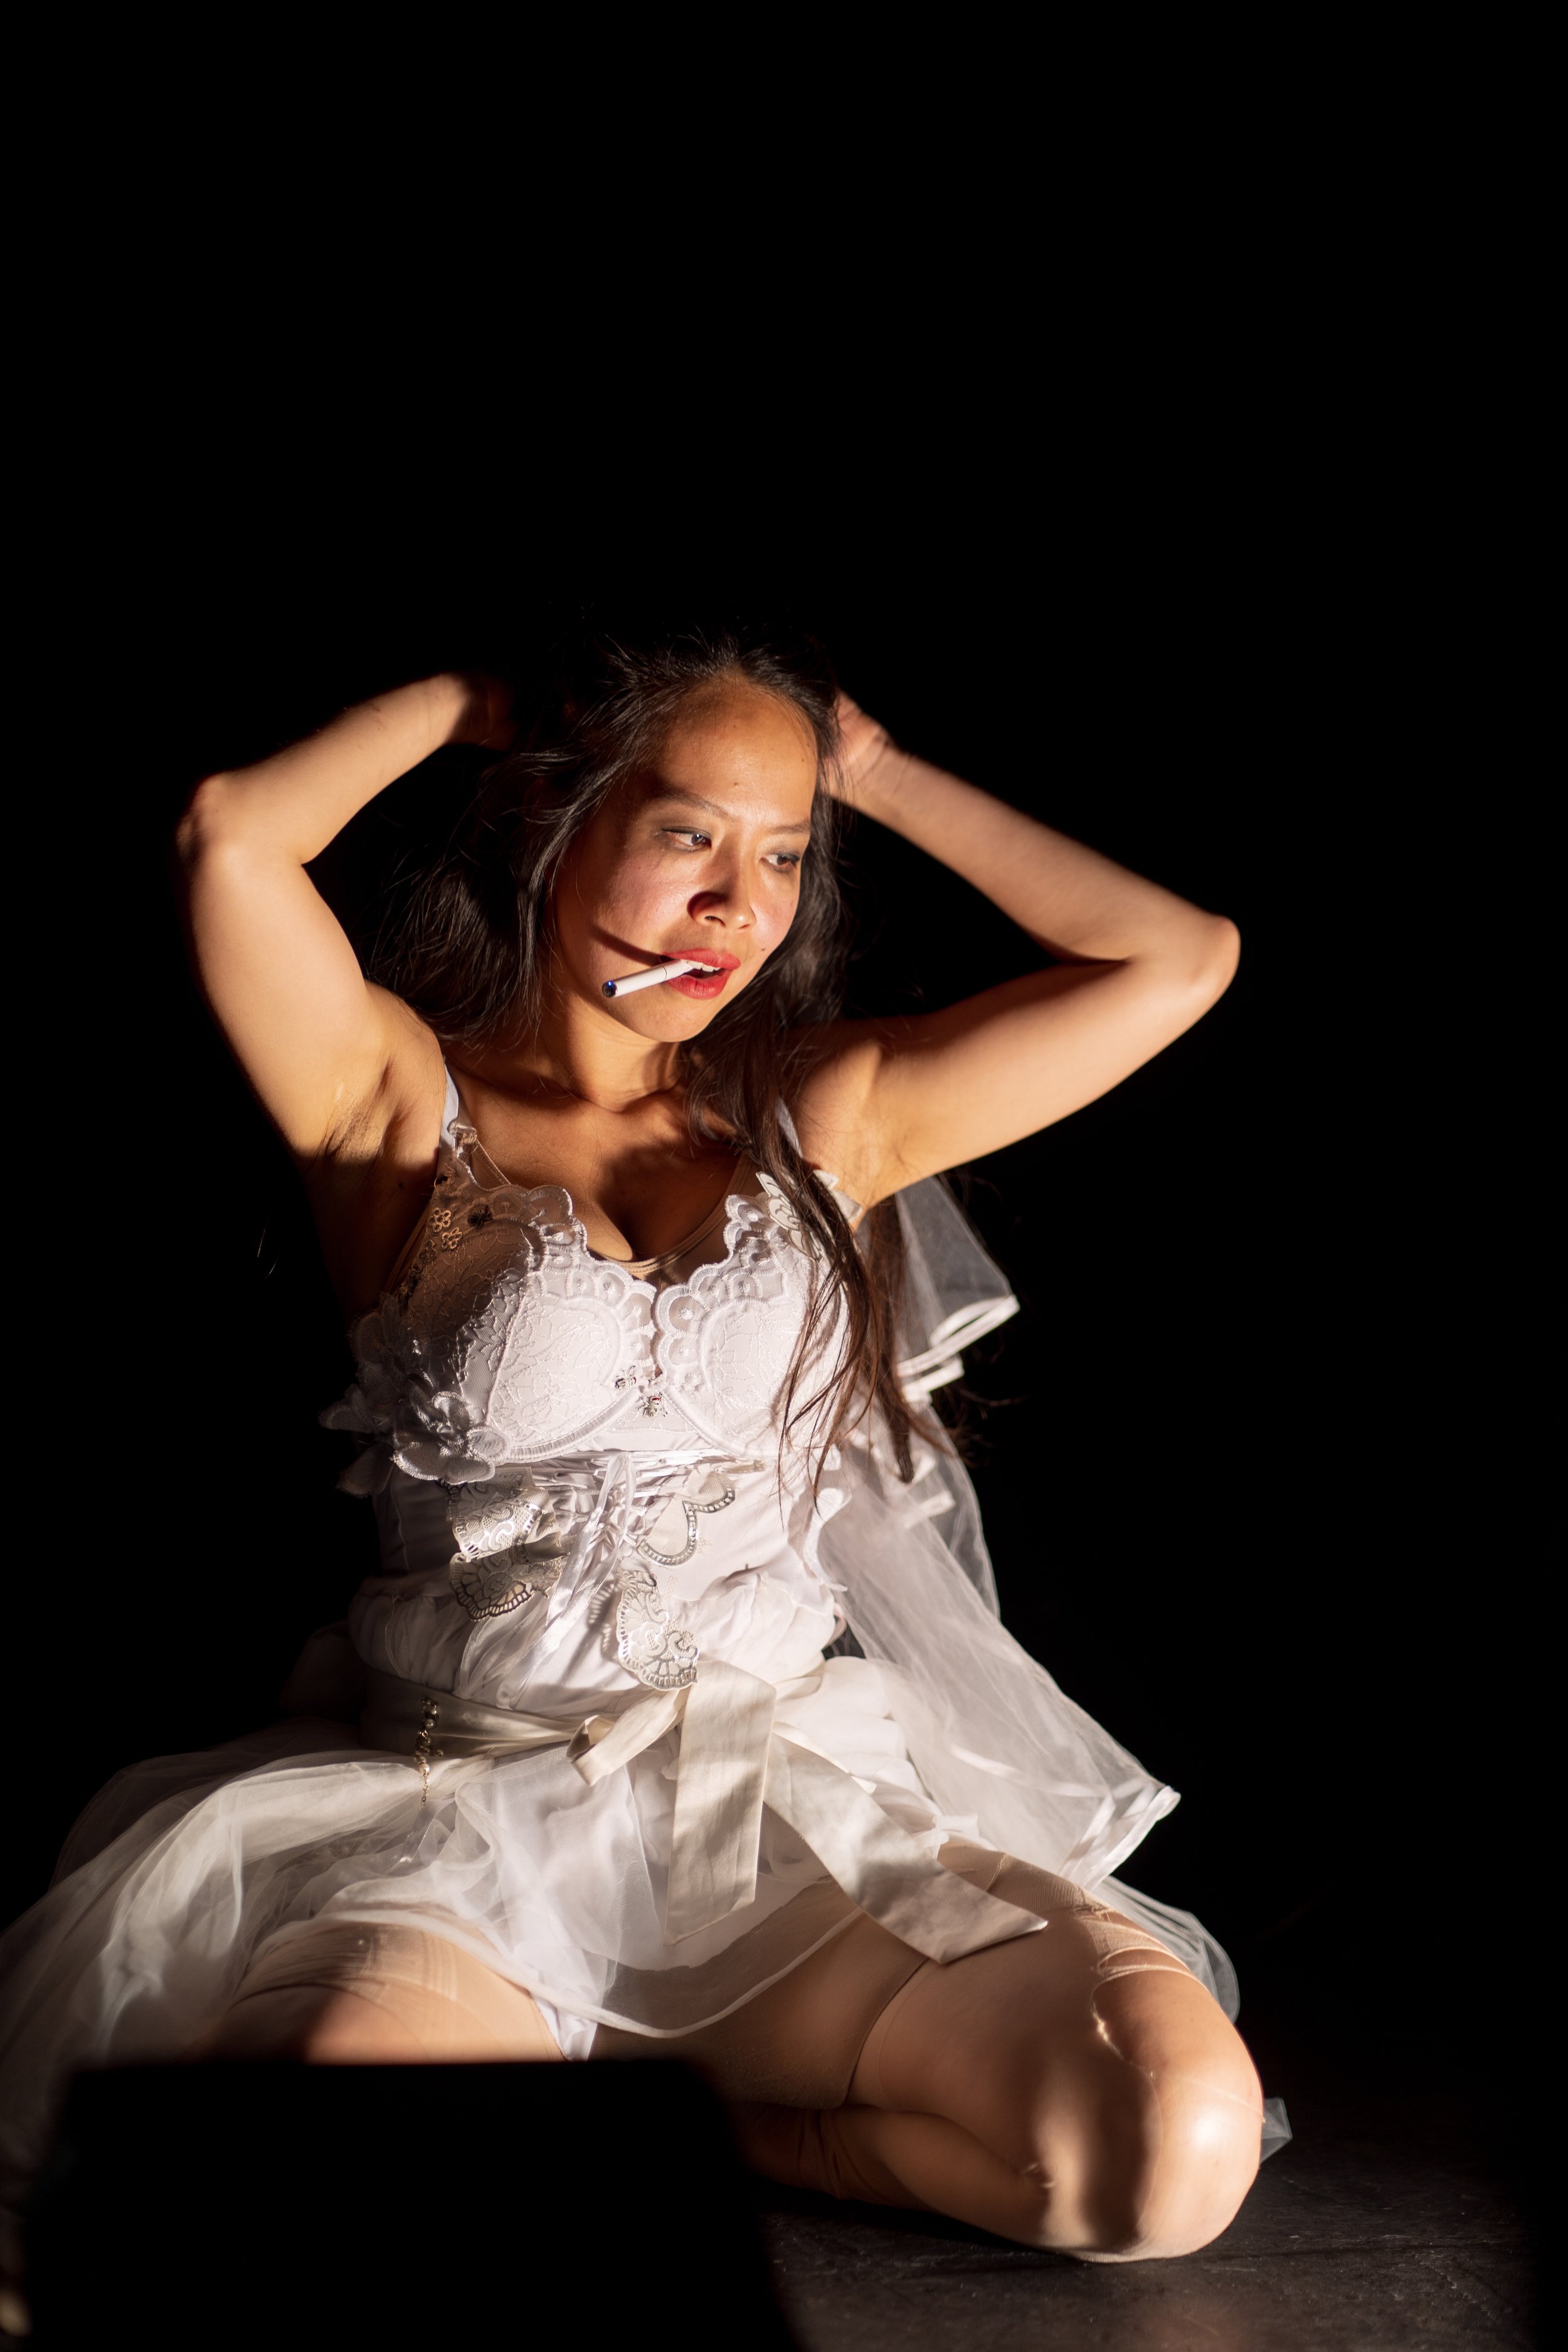  An East Asian woman in a wedding dress kneels on the floor. Her makeup is smudged and a cigarette dangles from her lips. 